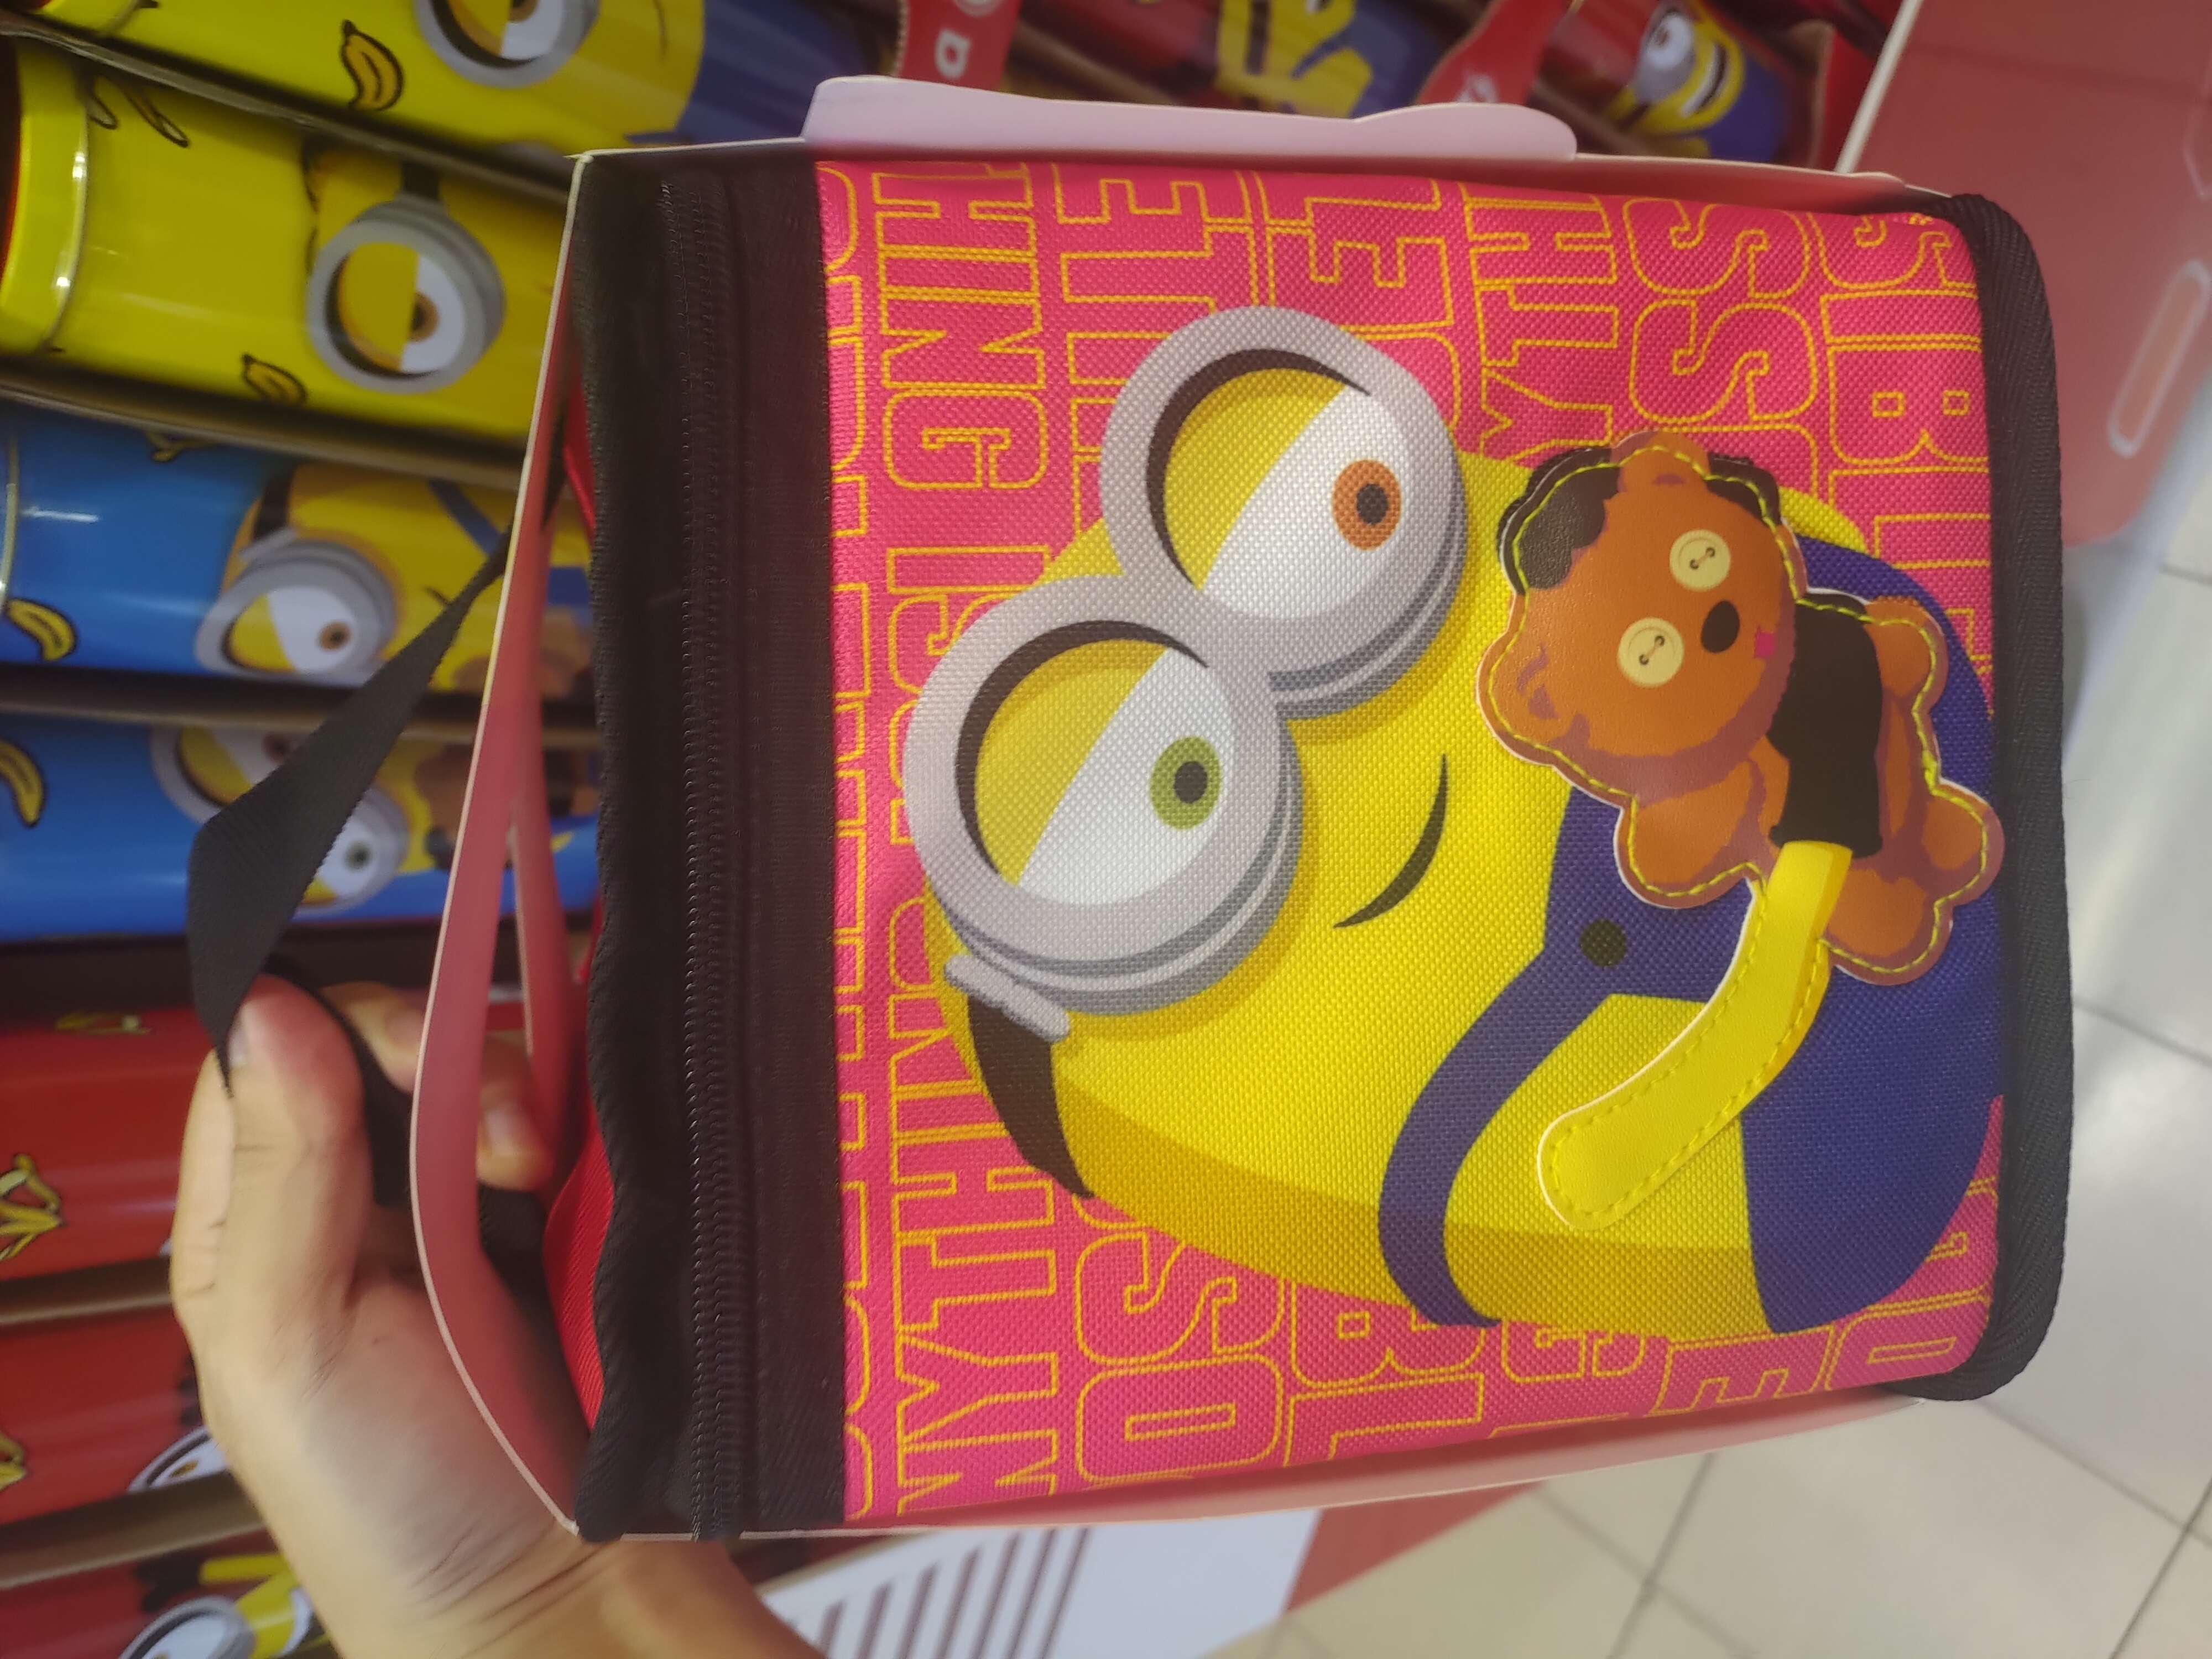 Free Limited Edition Minion Cooler Bag when you purchase Kit Kat at FairPrice - 8